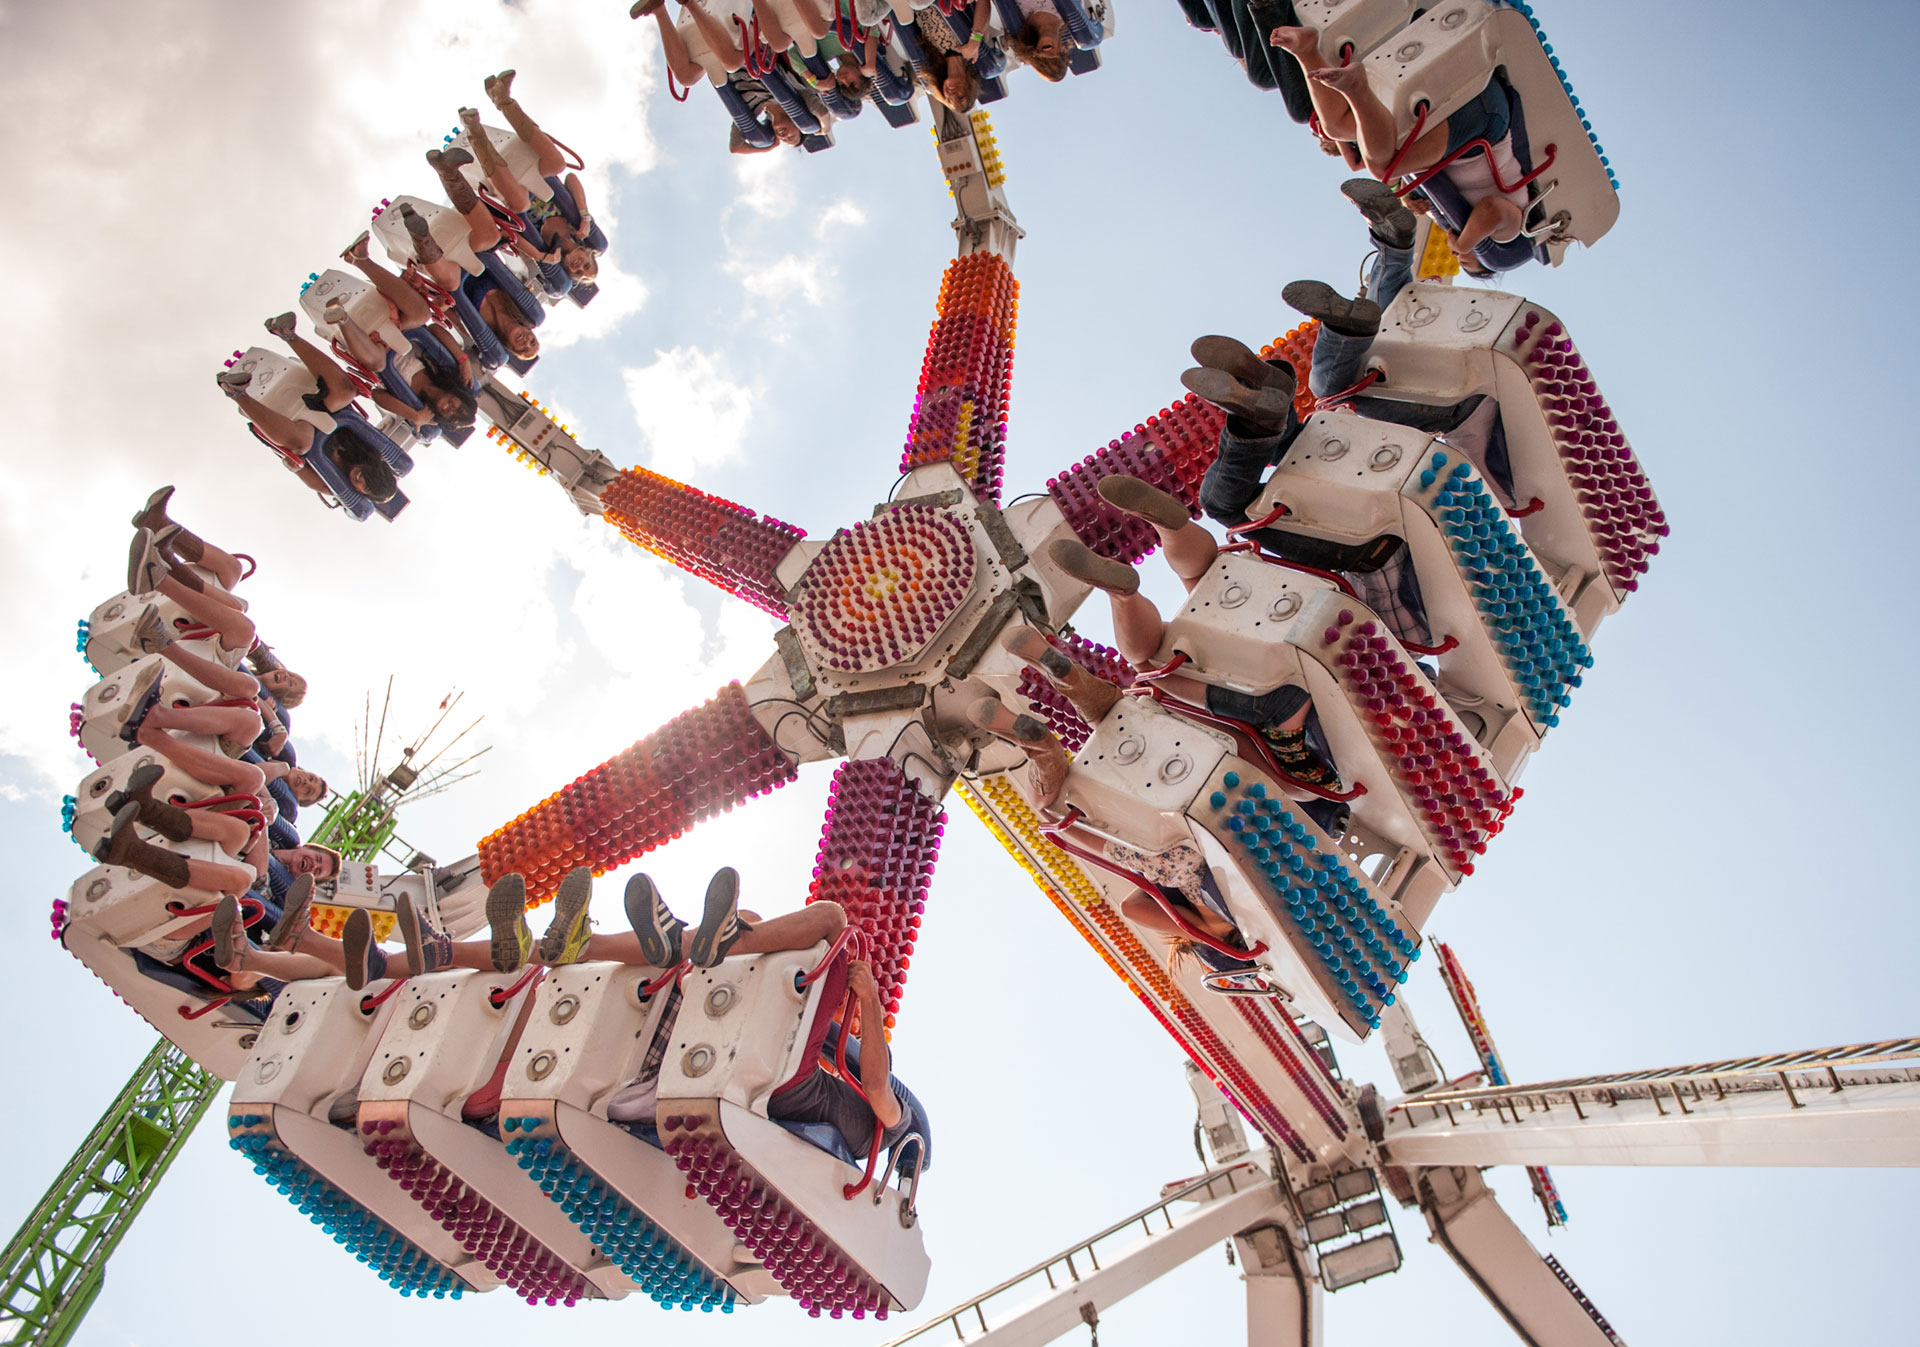 Midway rides at the Calgary Stampede (Photo credit: Shane Kuhn/Calgary Stampede).